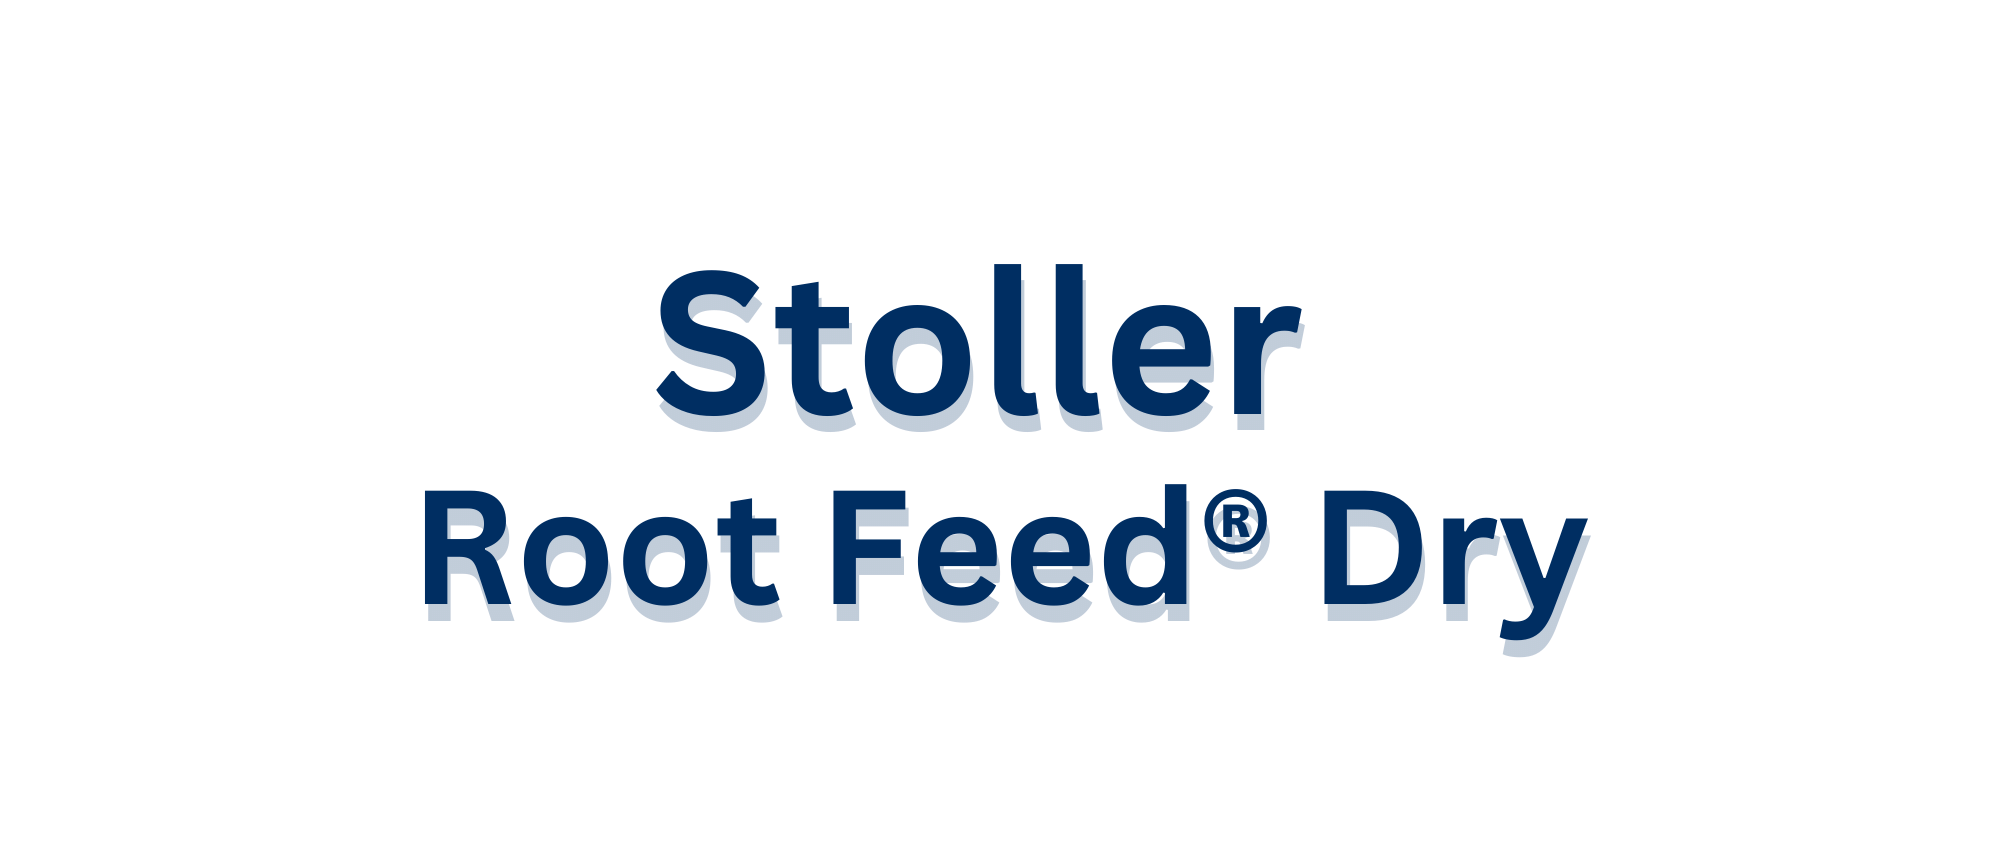 Stoller Root Feed Dry-blue